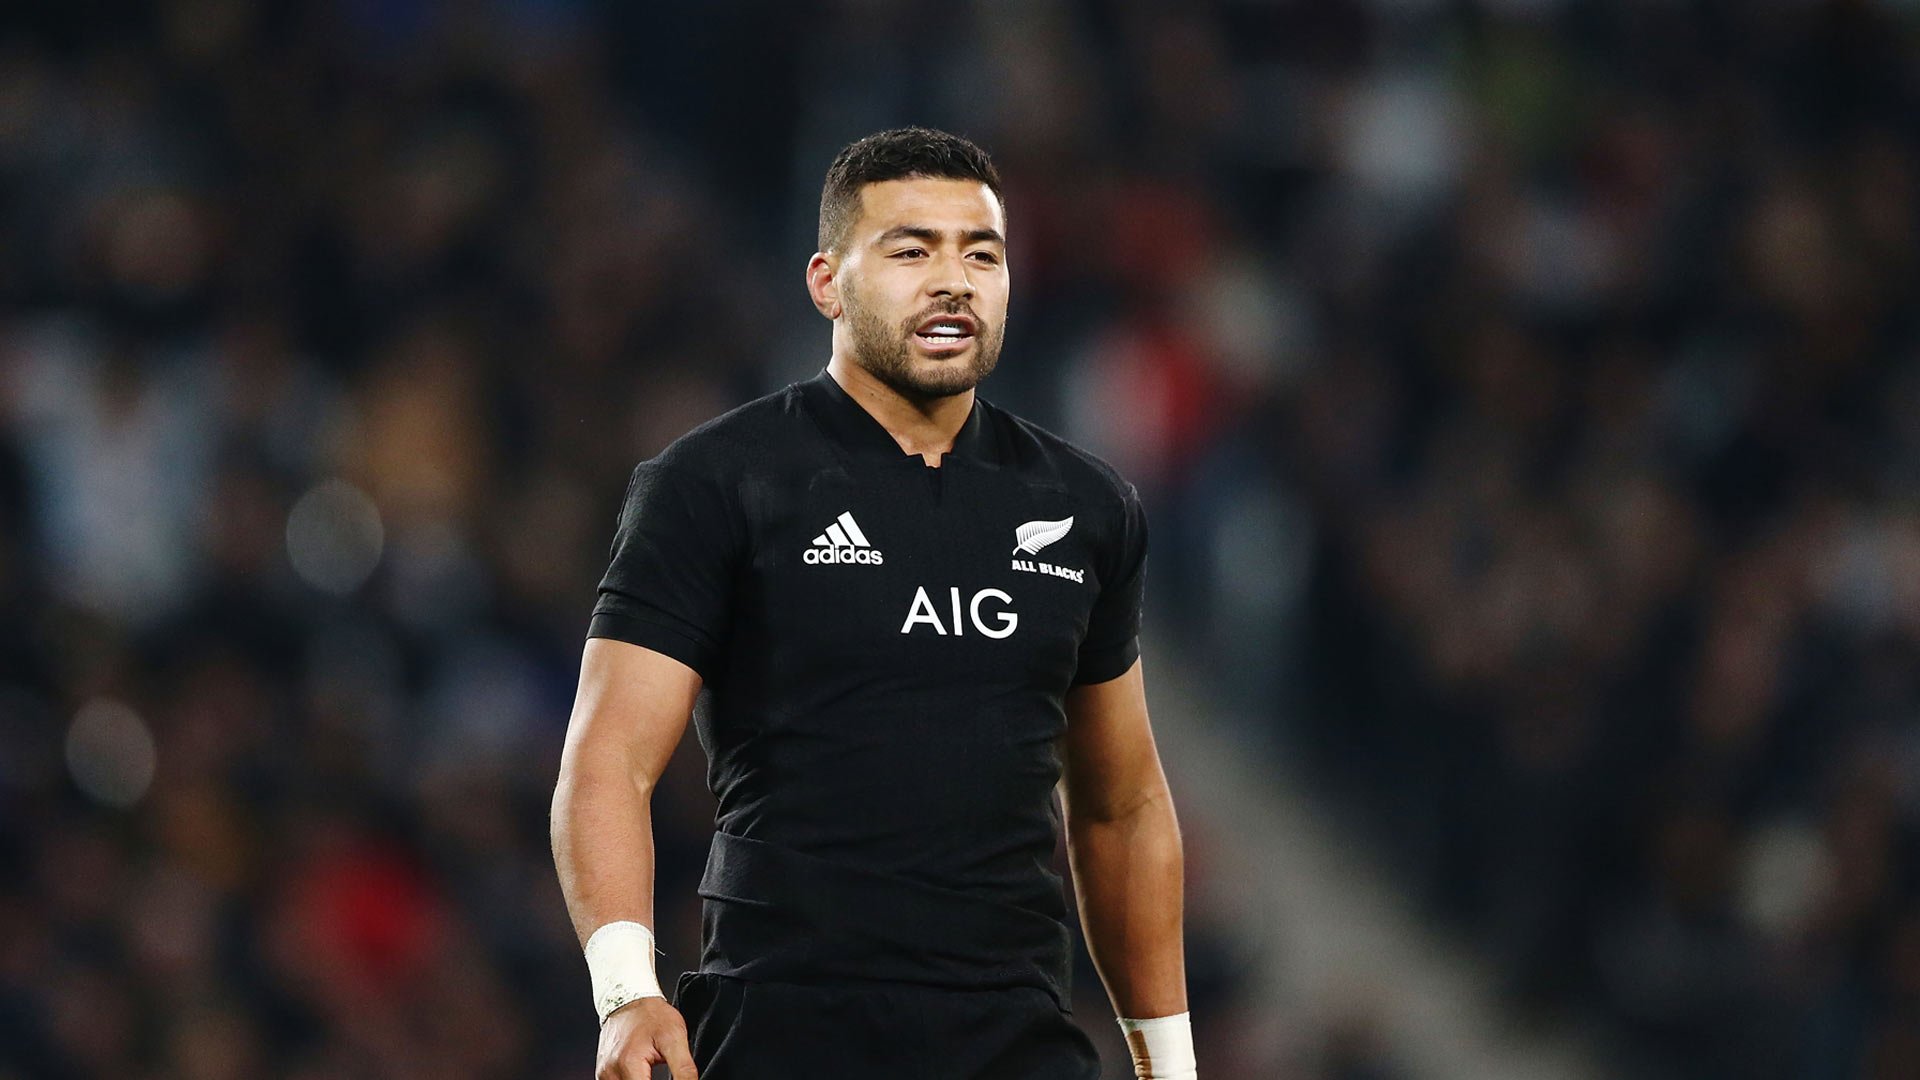 Richie Mo'unga rejects 'laughable' rumours